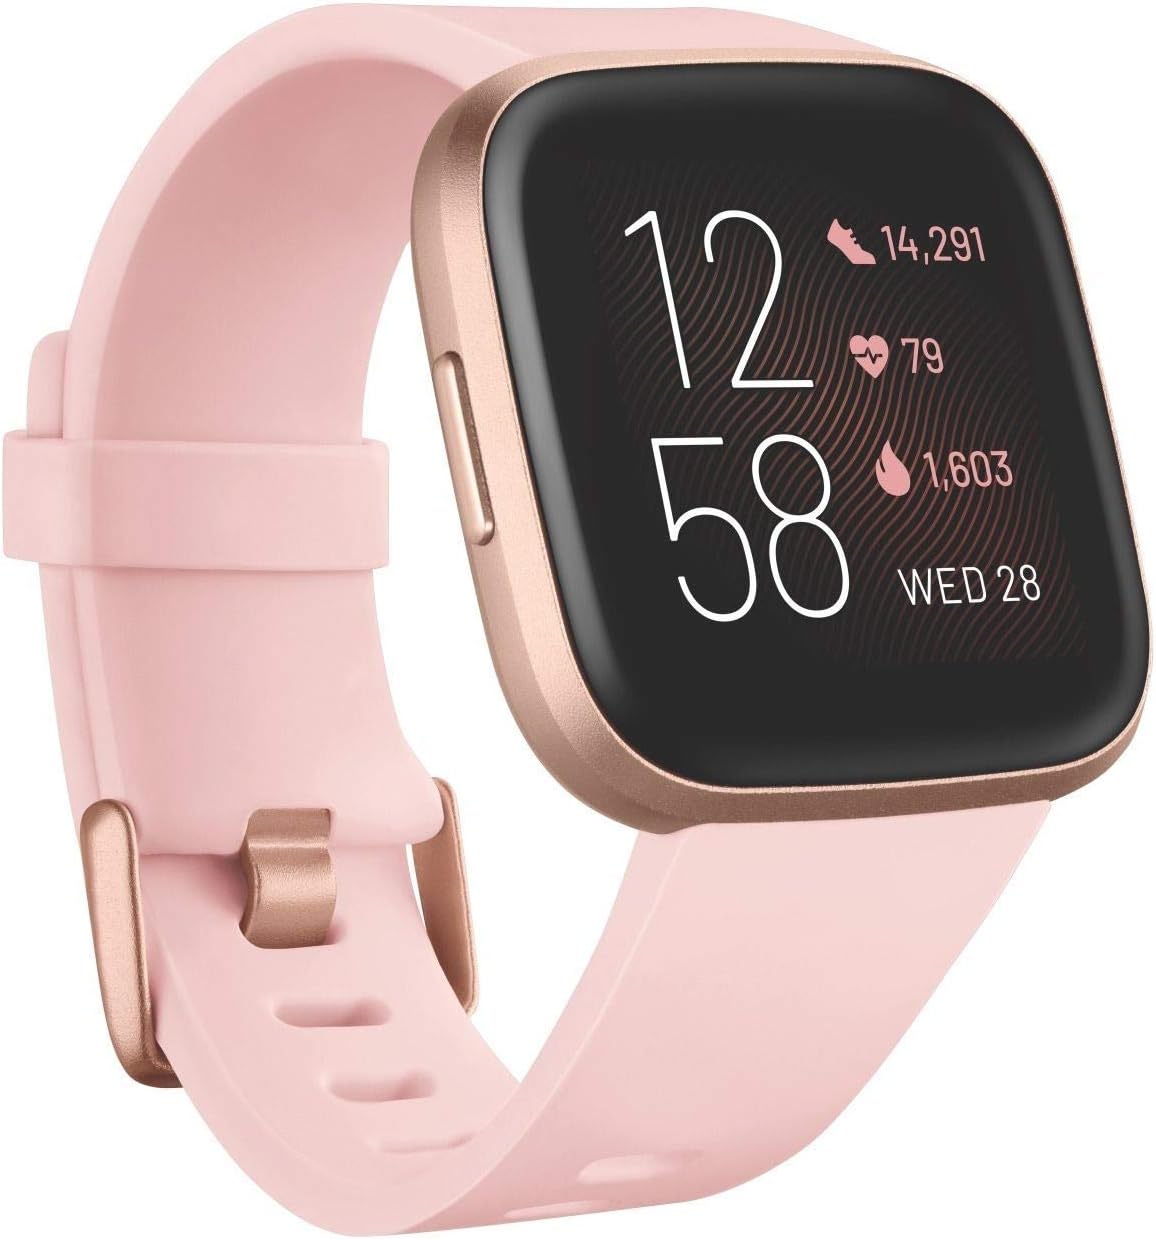 Fitbit Versa 2 Health & Fitness Smartwatch with Voice Control, Sleep Score & Music, Petal/Copper Rose, with Alexa built-in